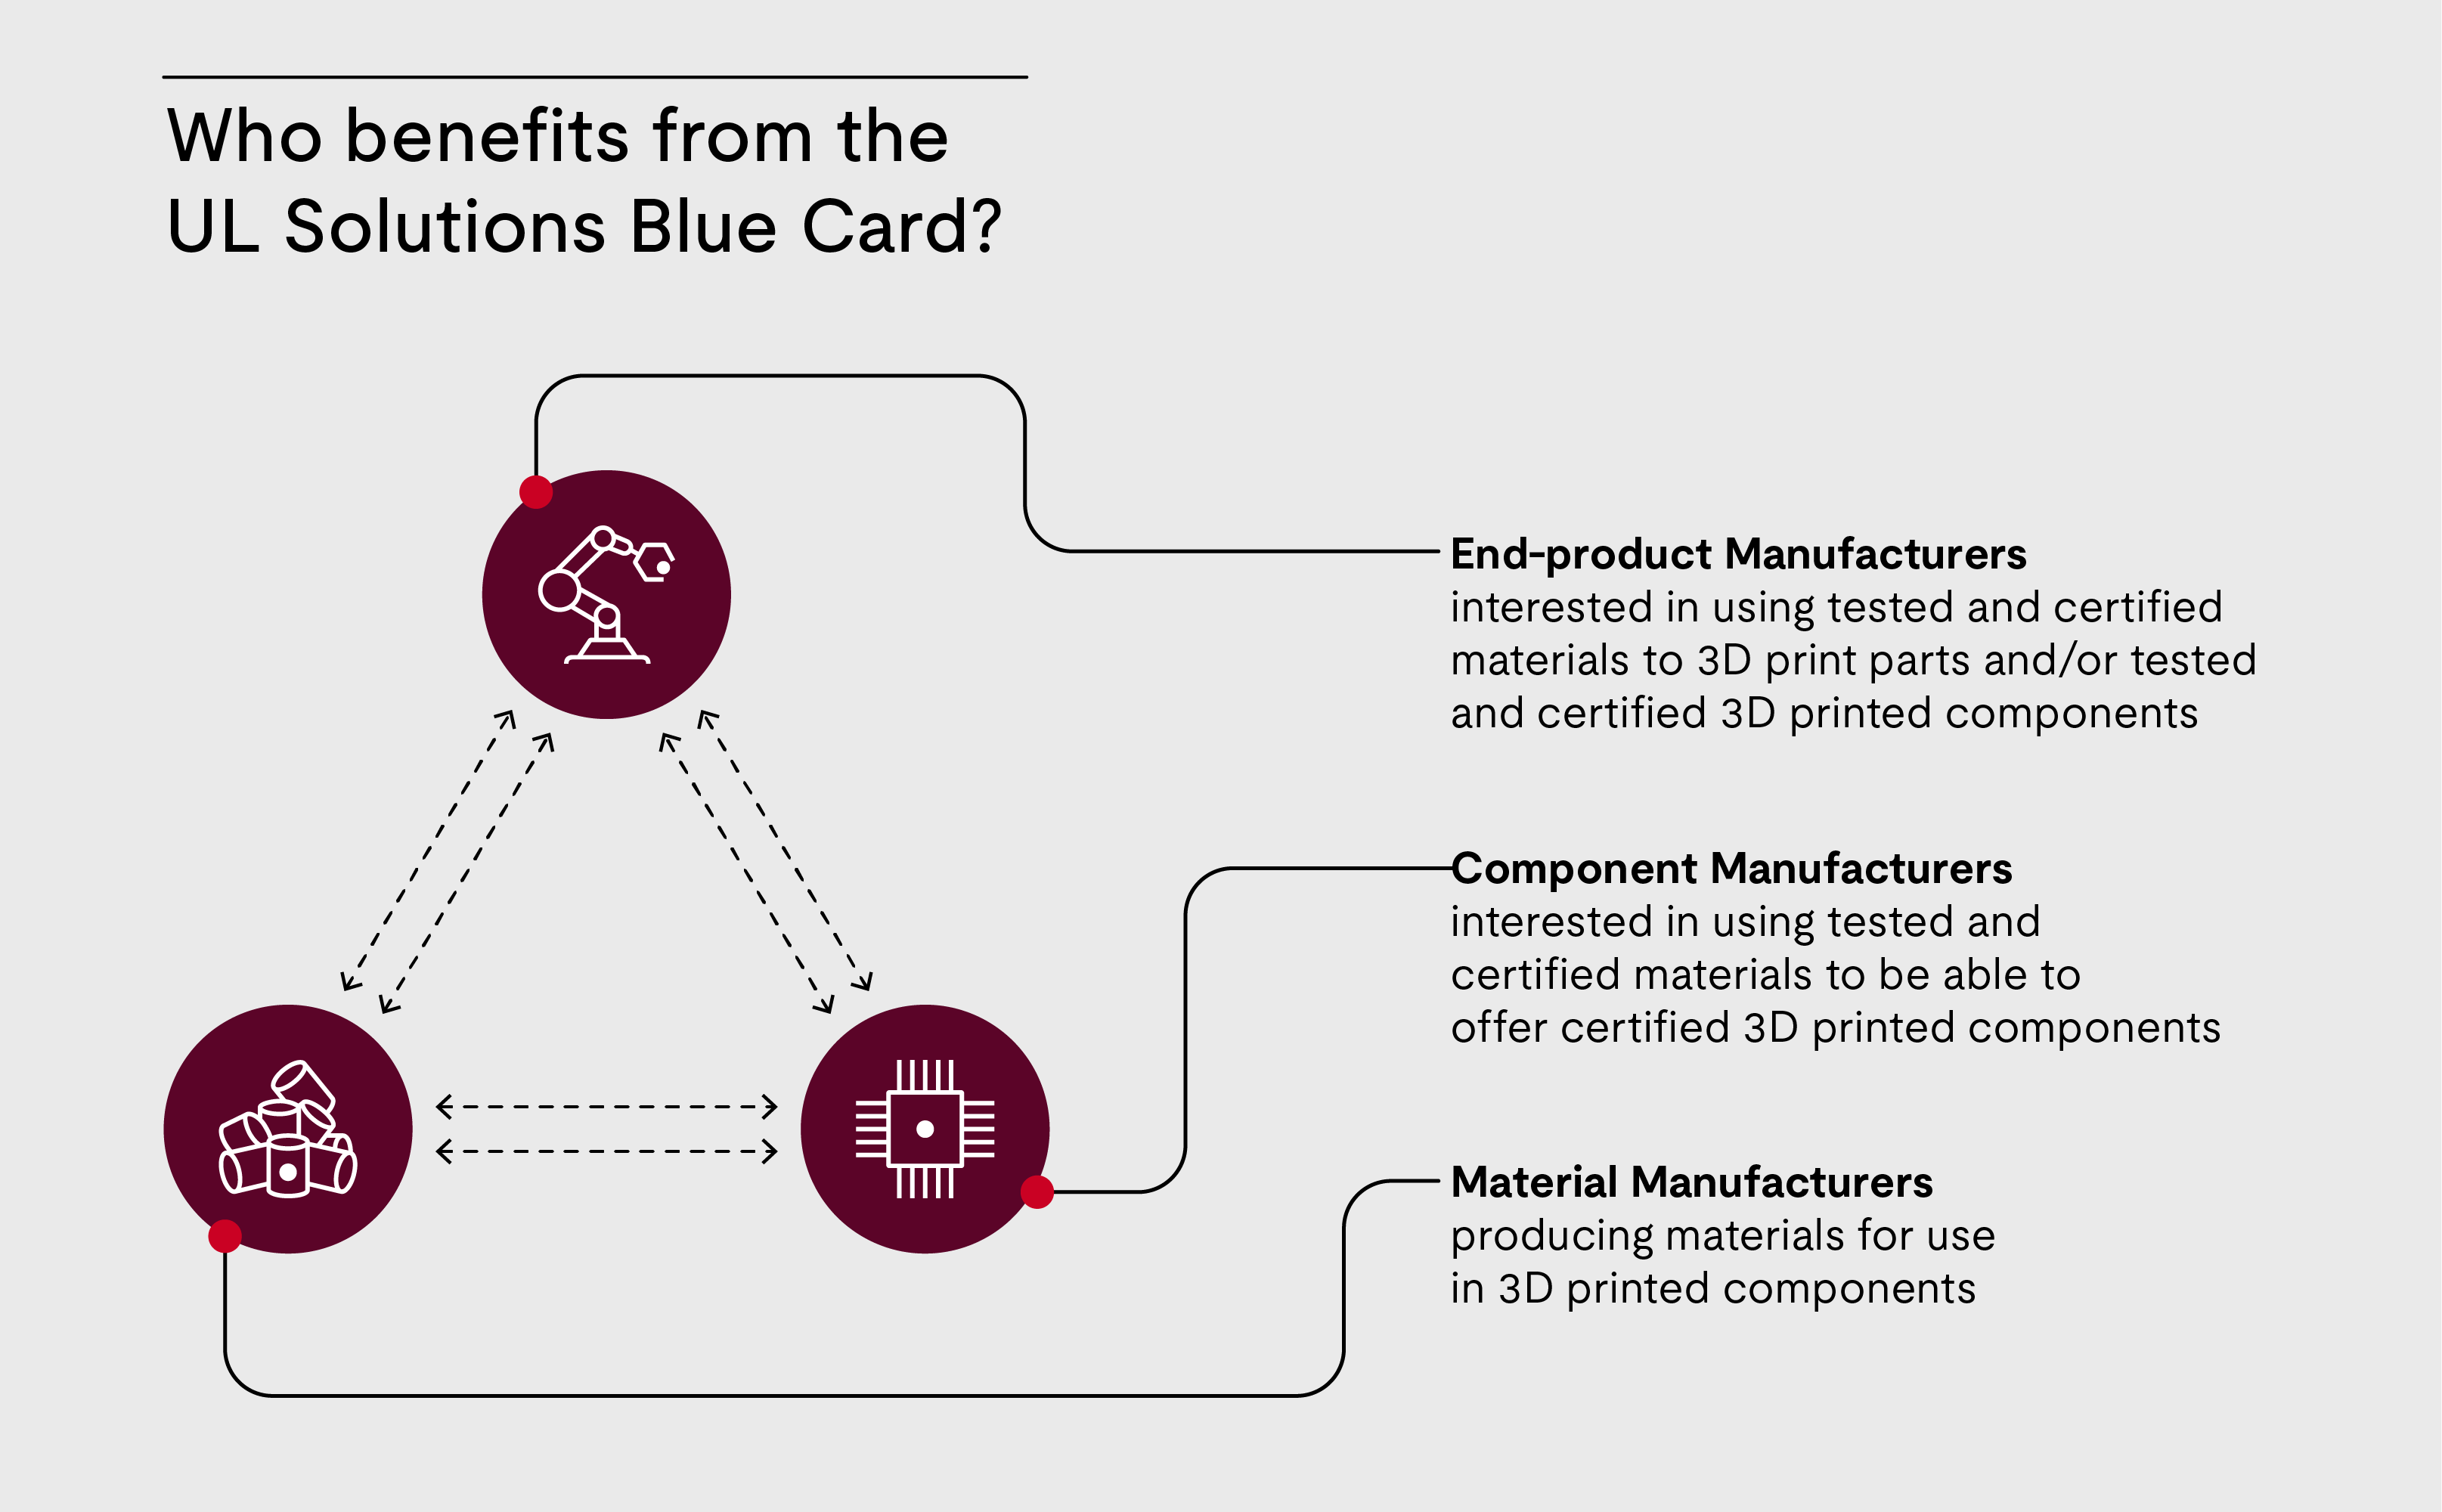 Who benefits from the UL Solutions Blue Card infographic